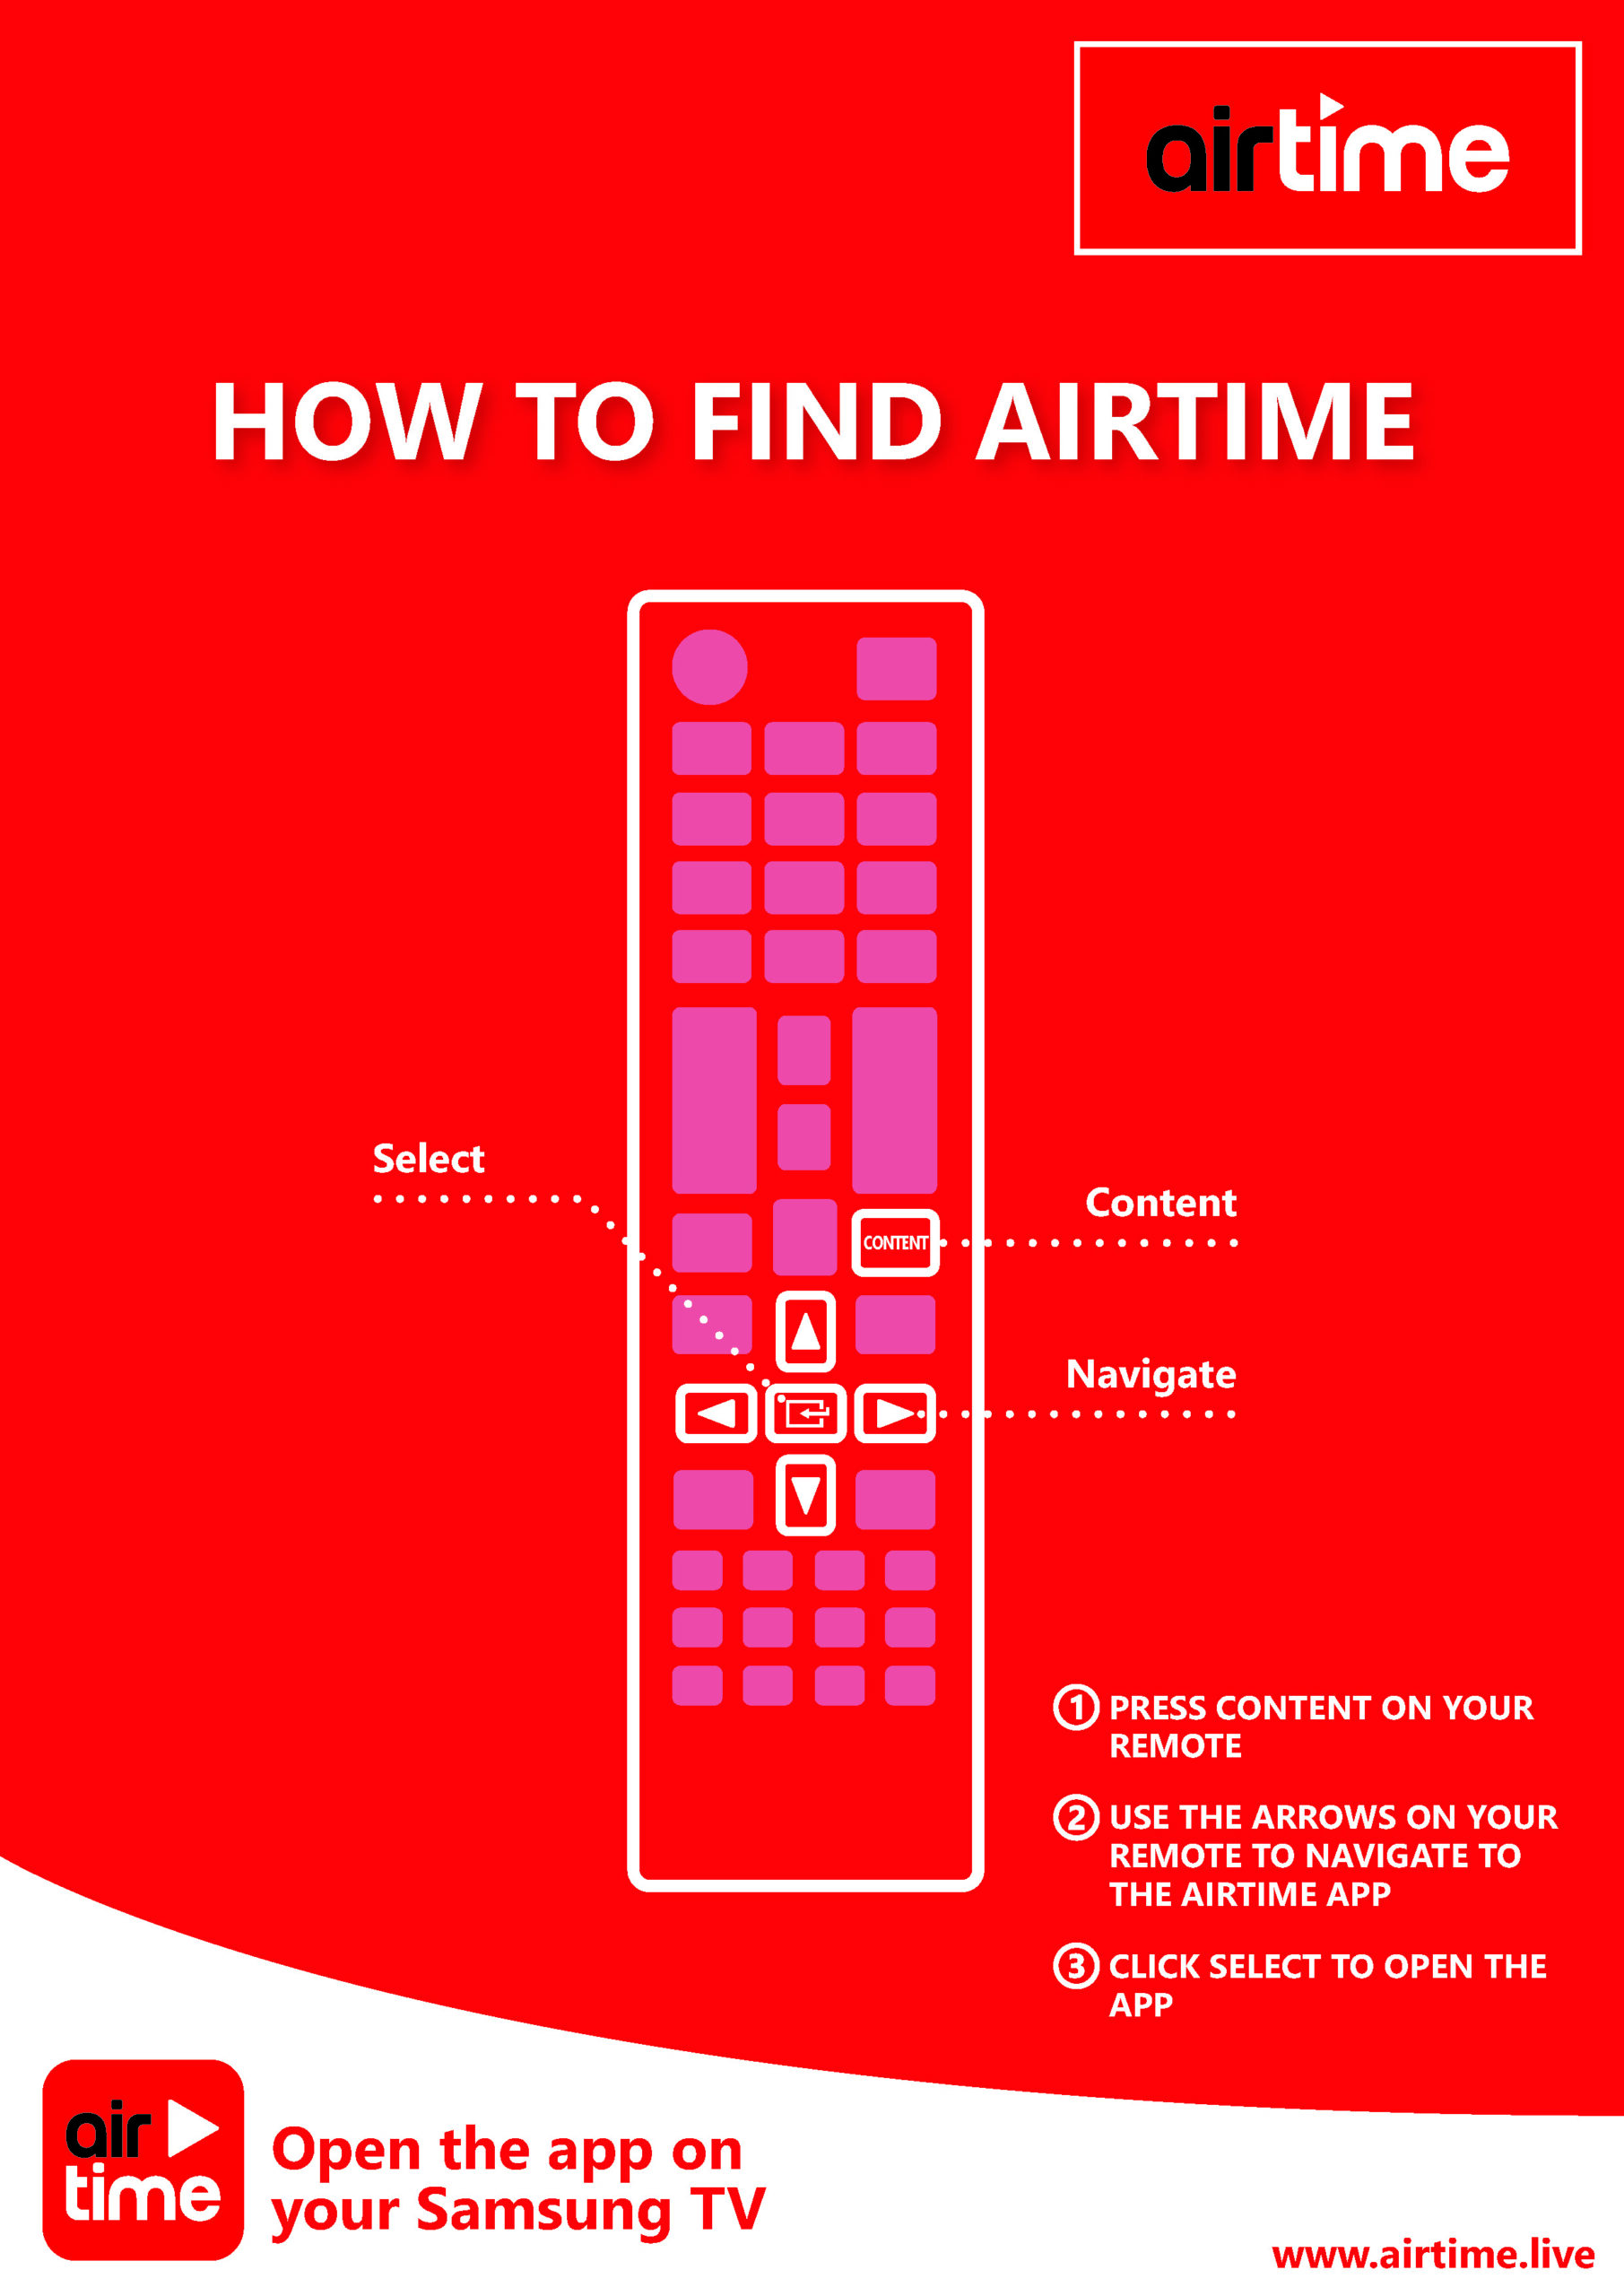 image of how guests use the remote to load the airtime app